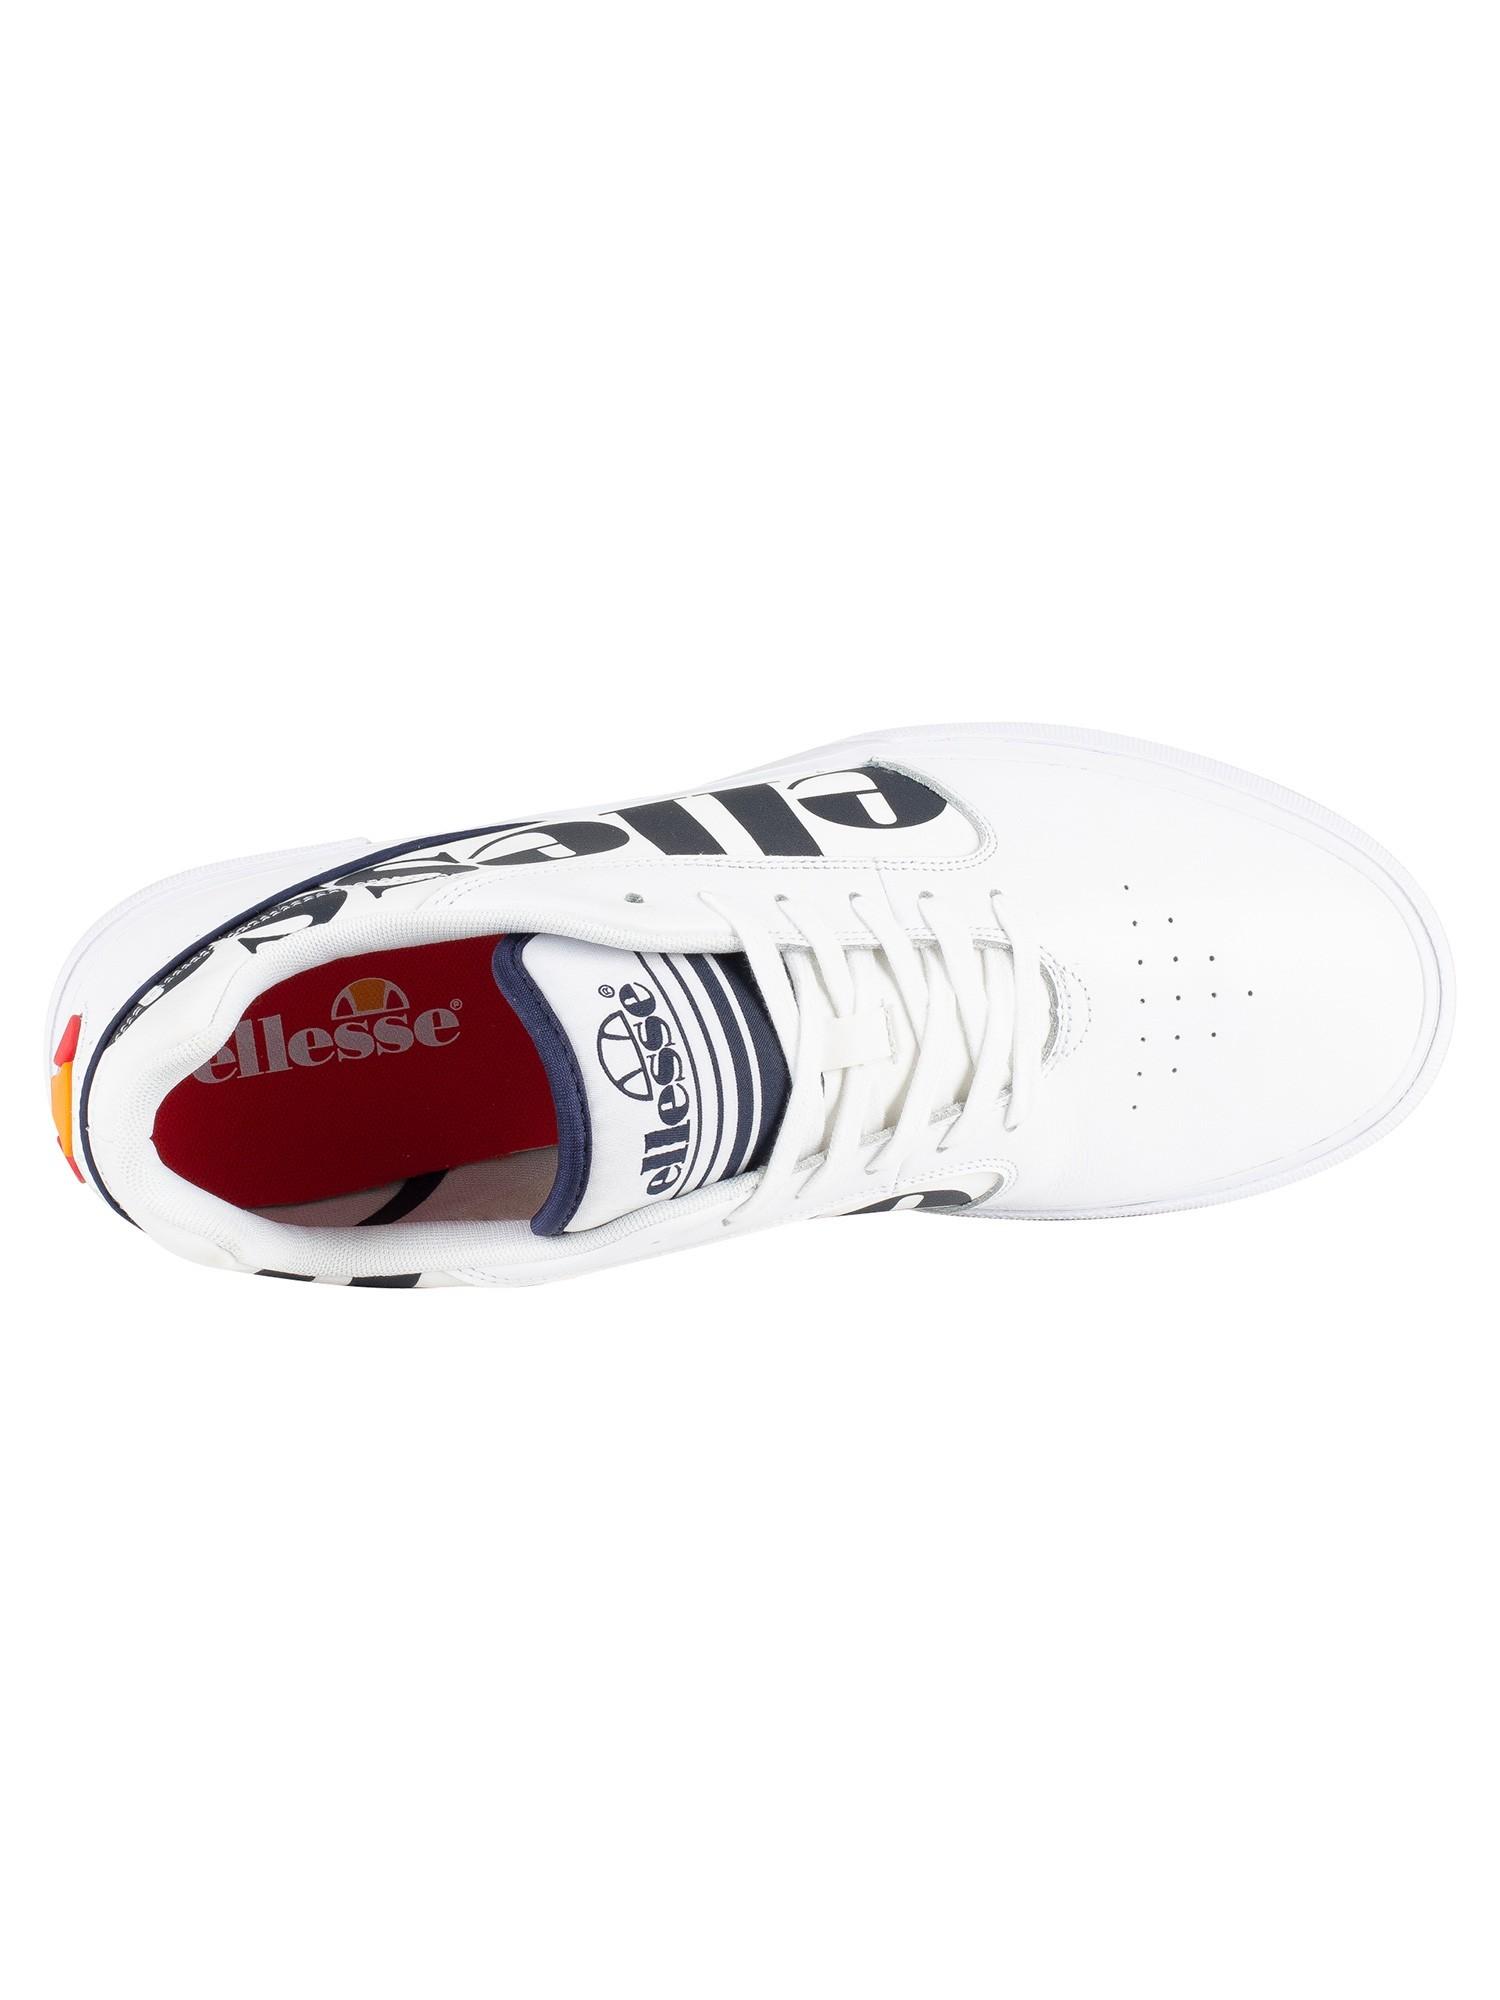 Ellesse Ostuni Leather Trainers in White/Navy (White) for Men - Lyst